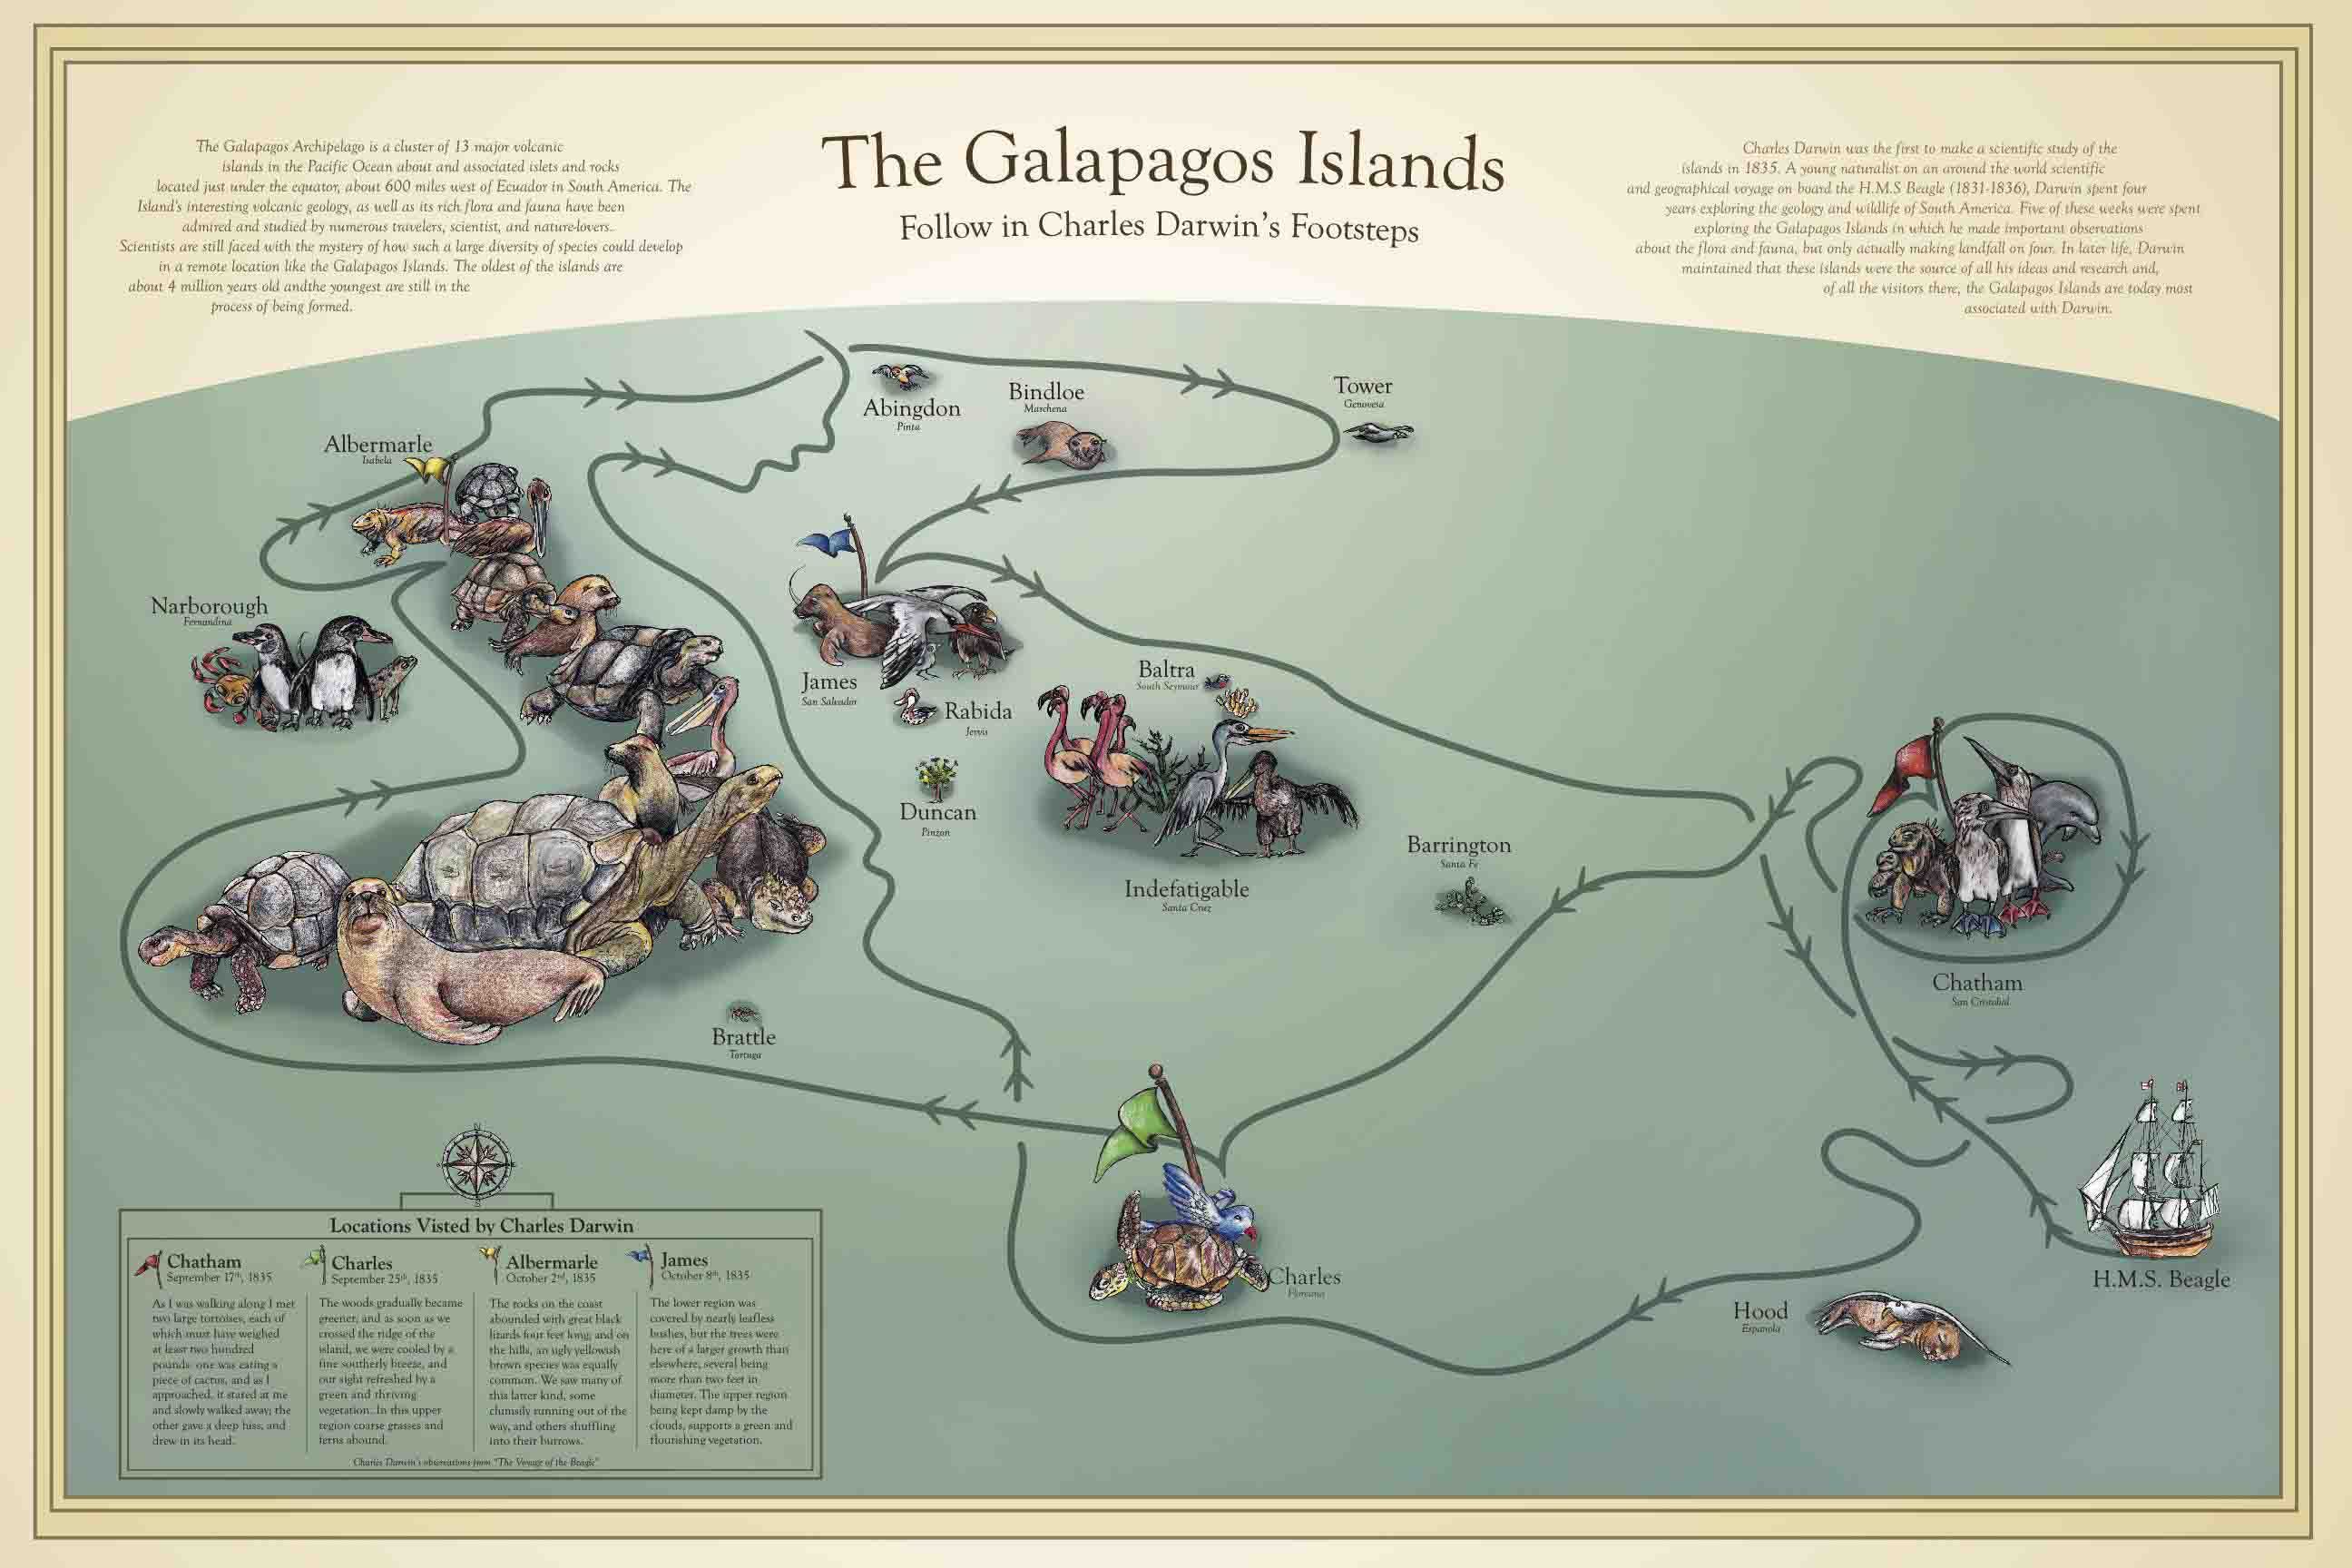 The-Galapagos-Islands-Follow-in-Charles-Darwin-Footsteps-Journey